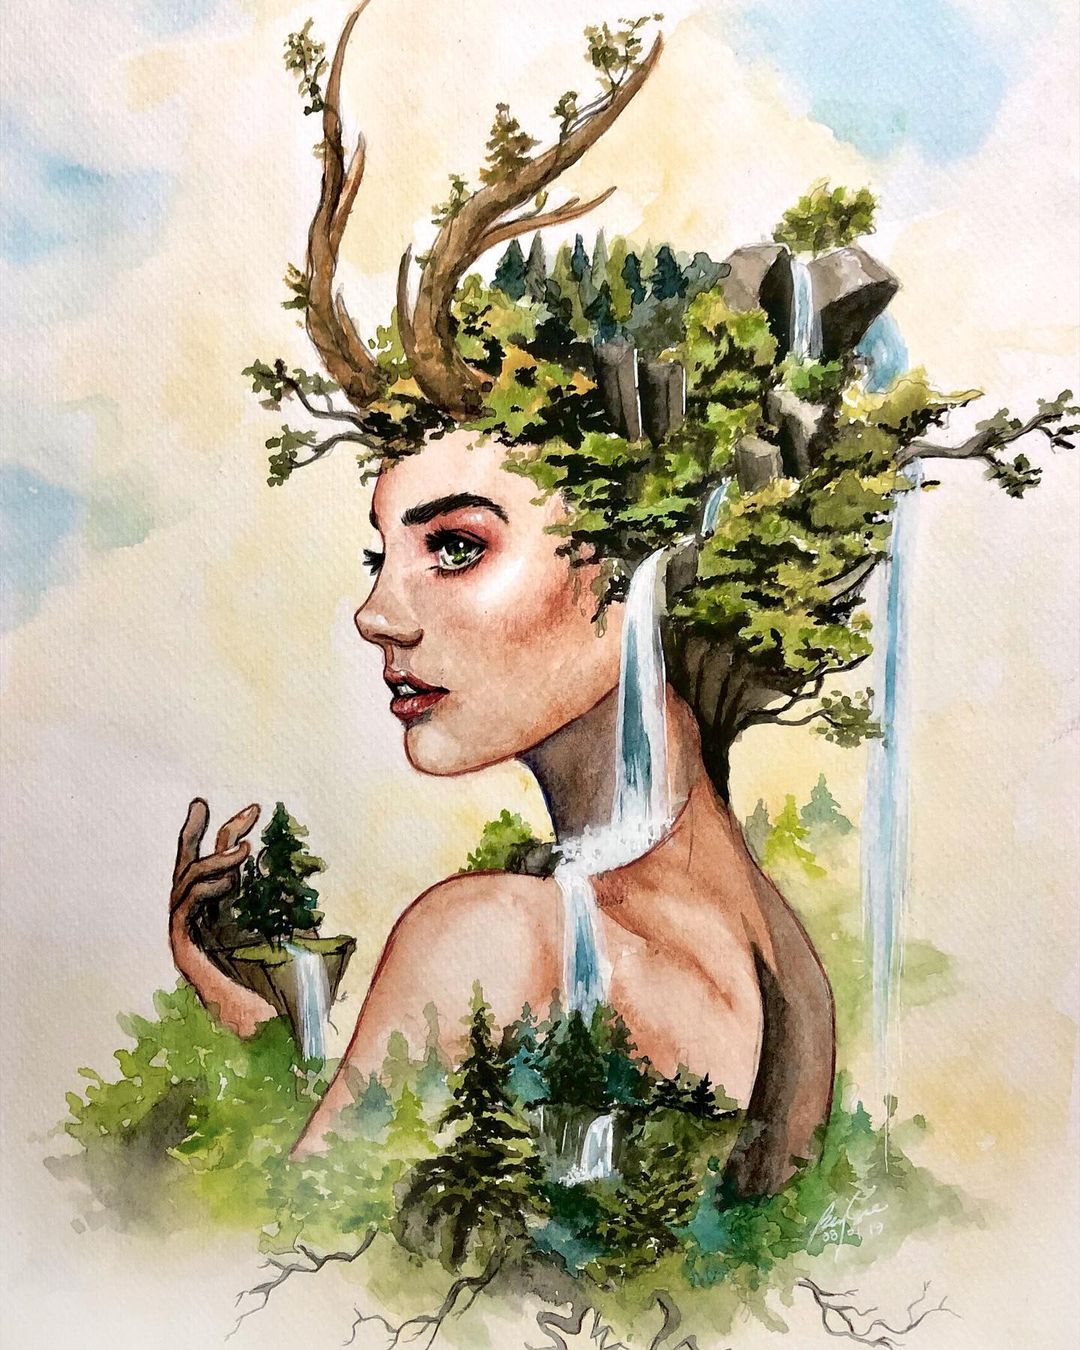 Portrait of a person with rocky mountains and waterfalls for hair, and tree antlers